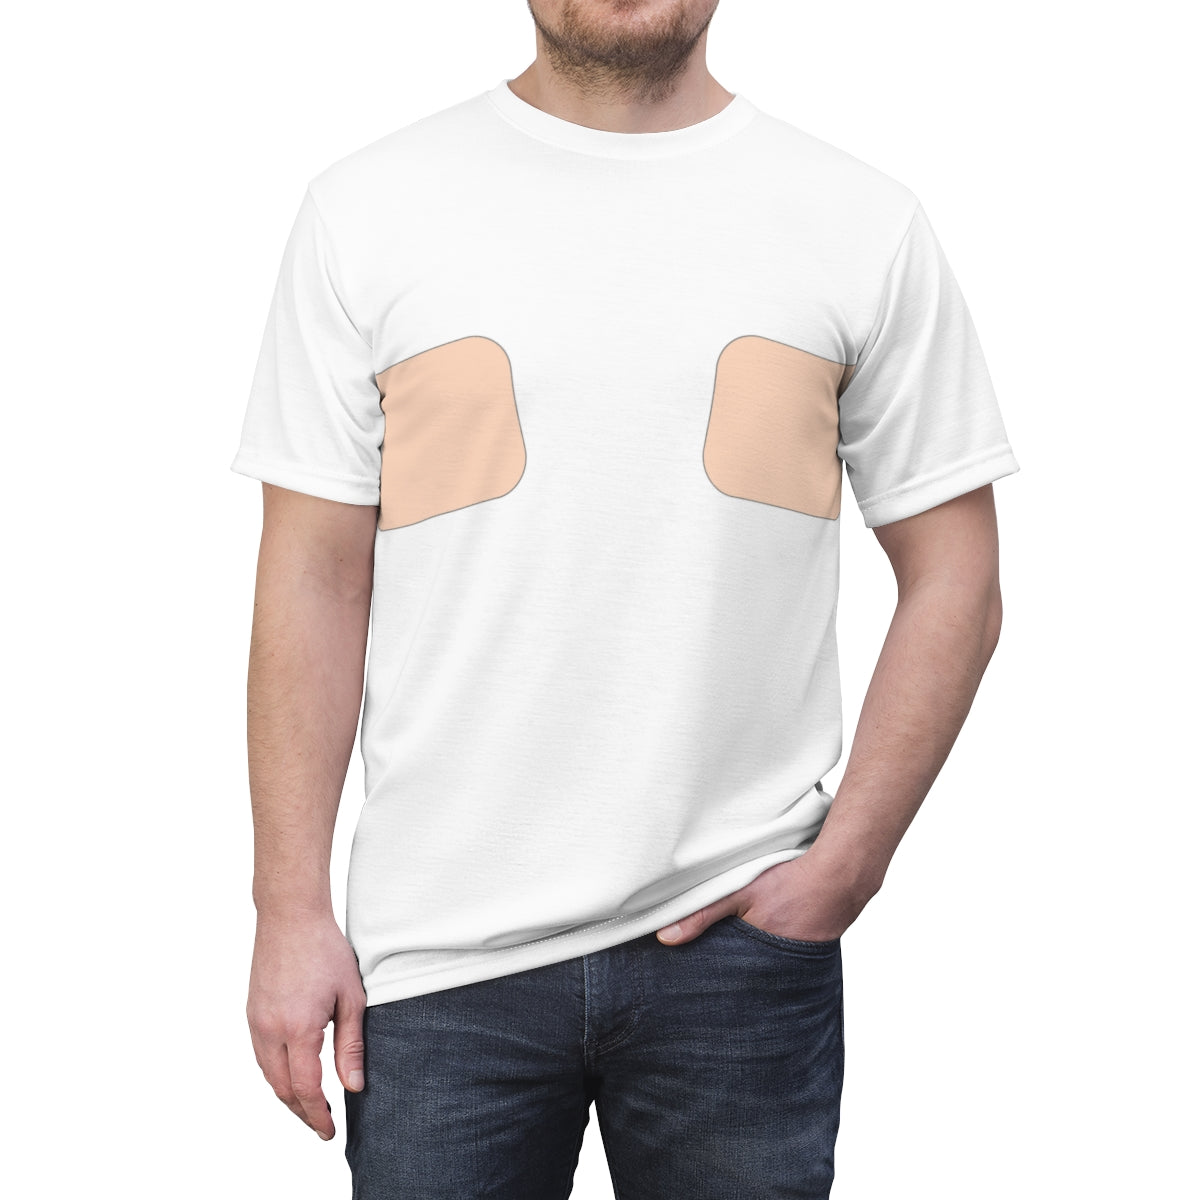 Normalize Chest Taping Tee | Skin Tone 001 - 1 Strip